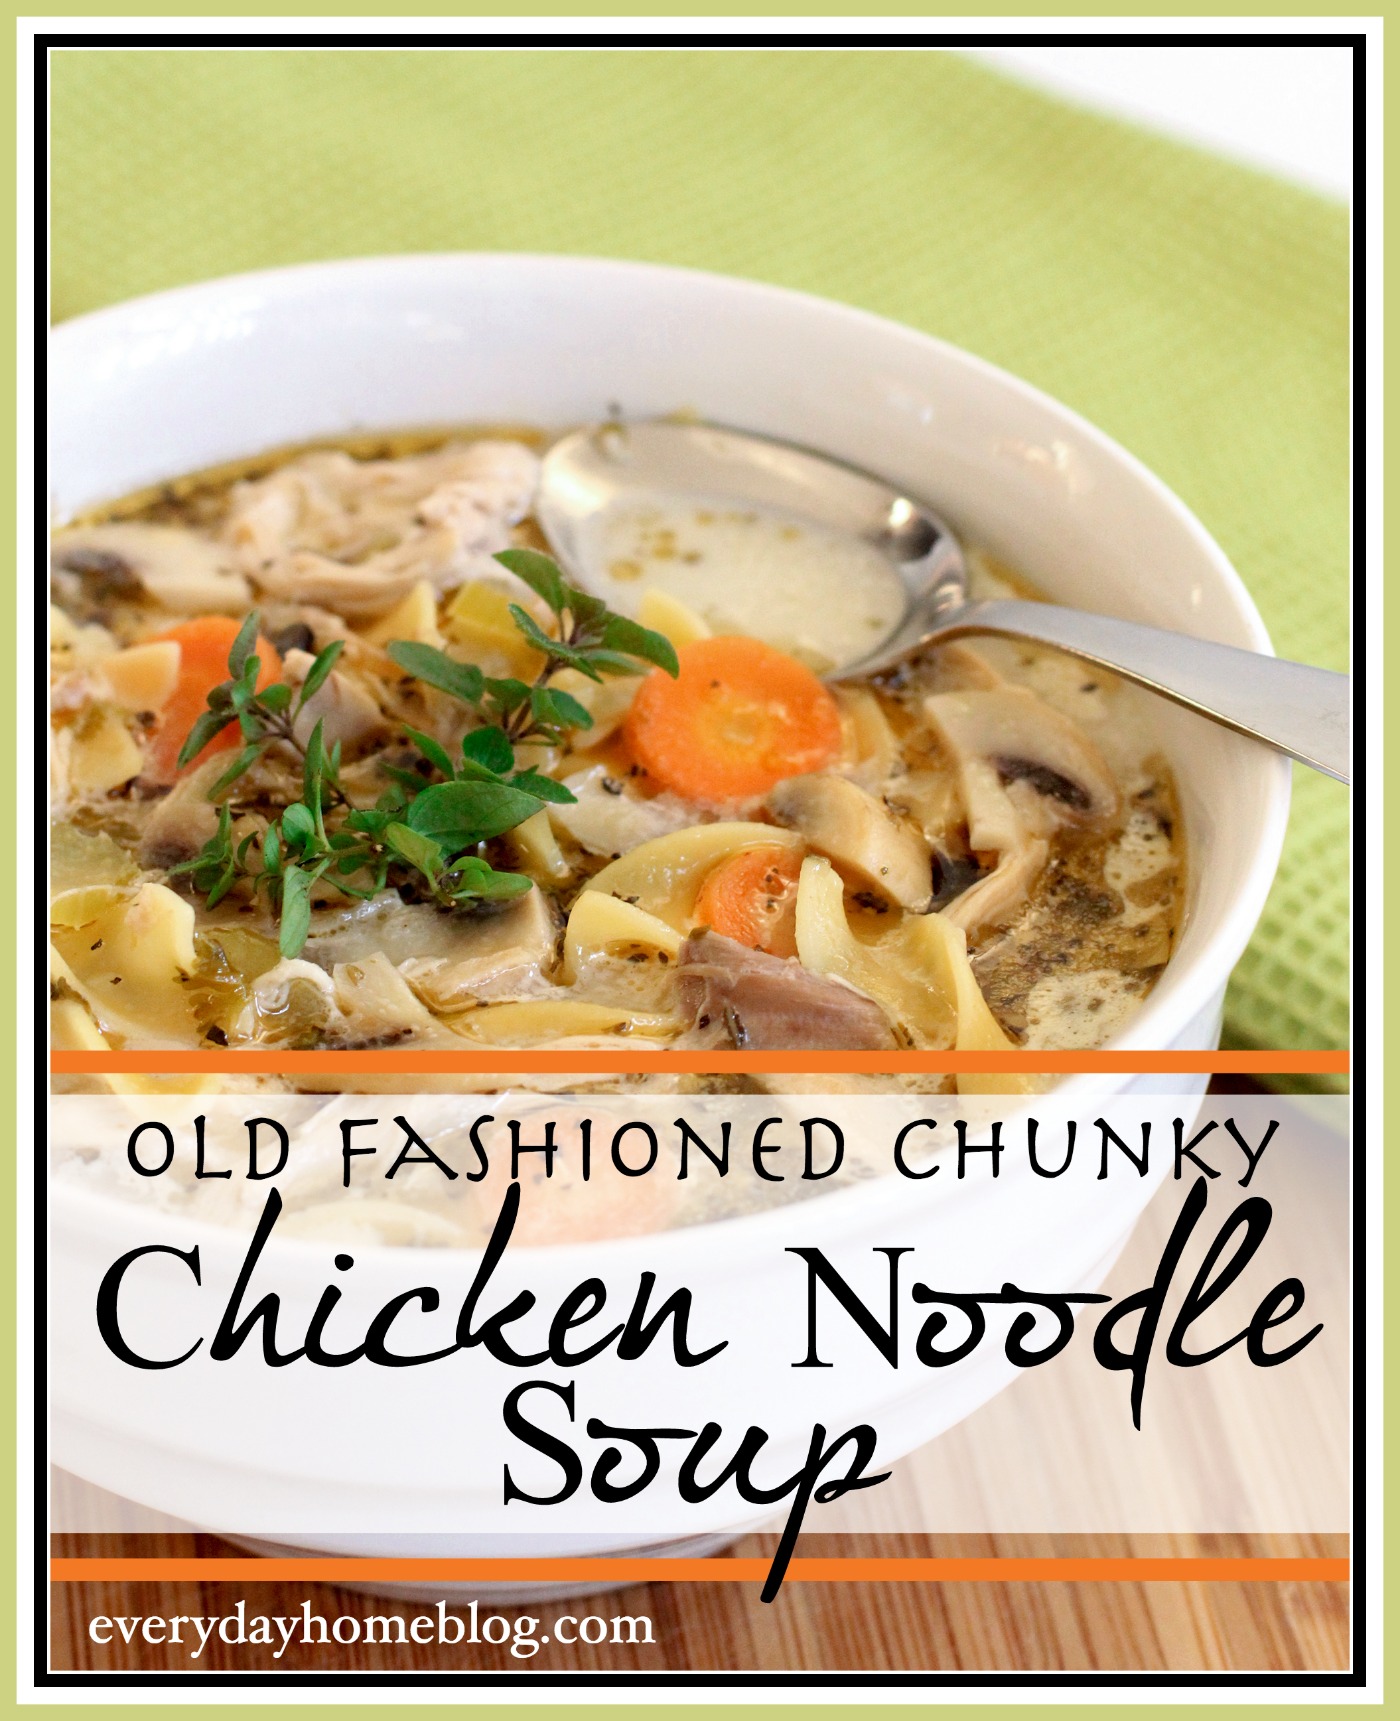 Old Fashioned Chunky Chicken Noodle Soup | The Everyday Home | www.everydayhomeblog.com